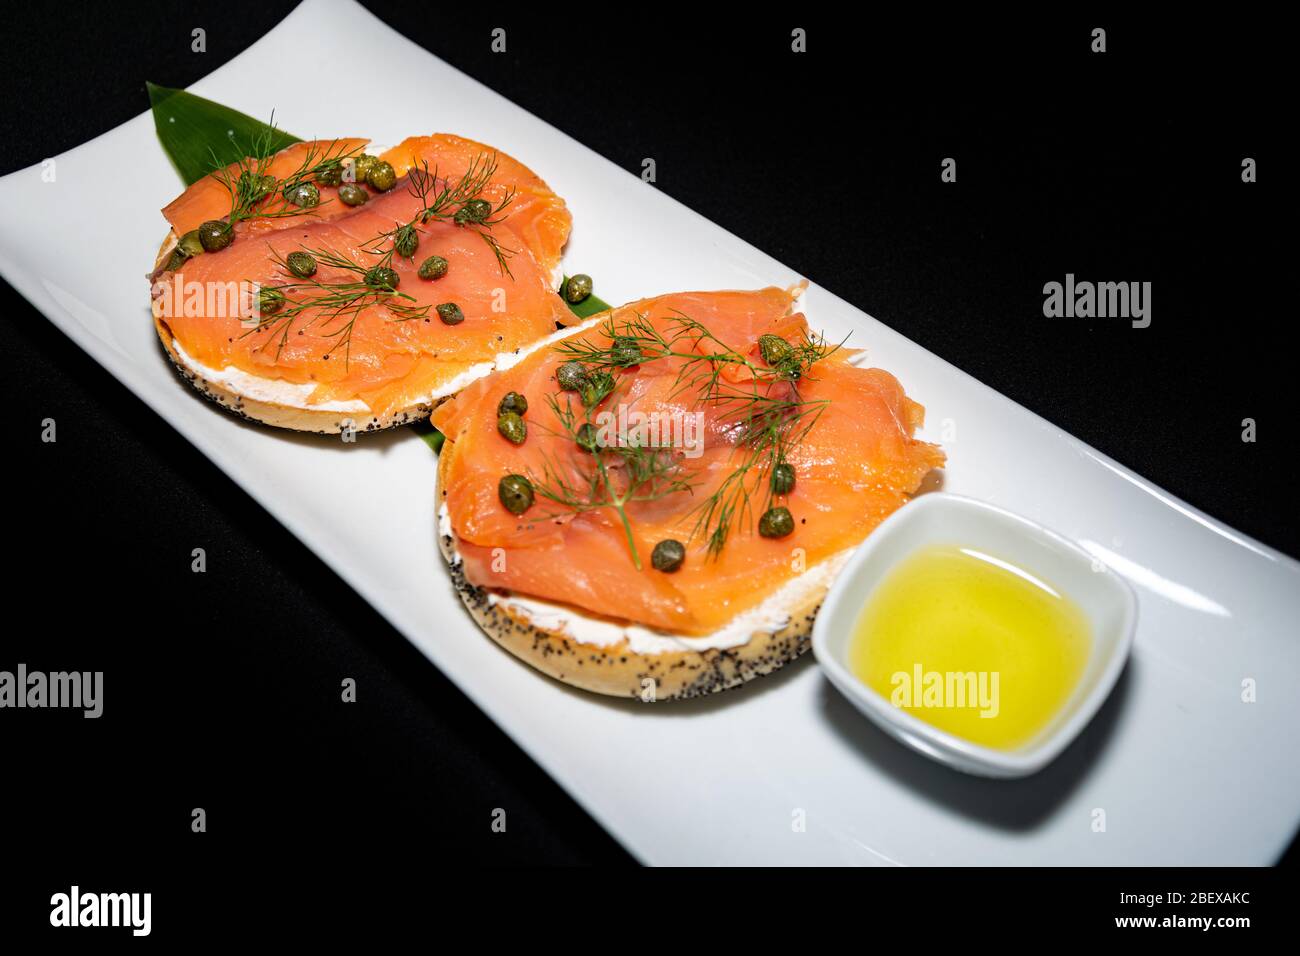 A Breakfast Bagel Filled With Smoked Salmon And Cream Cheese Spread With Garlic Oil Dip Stock Photo Alamy